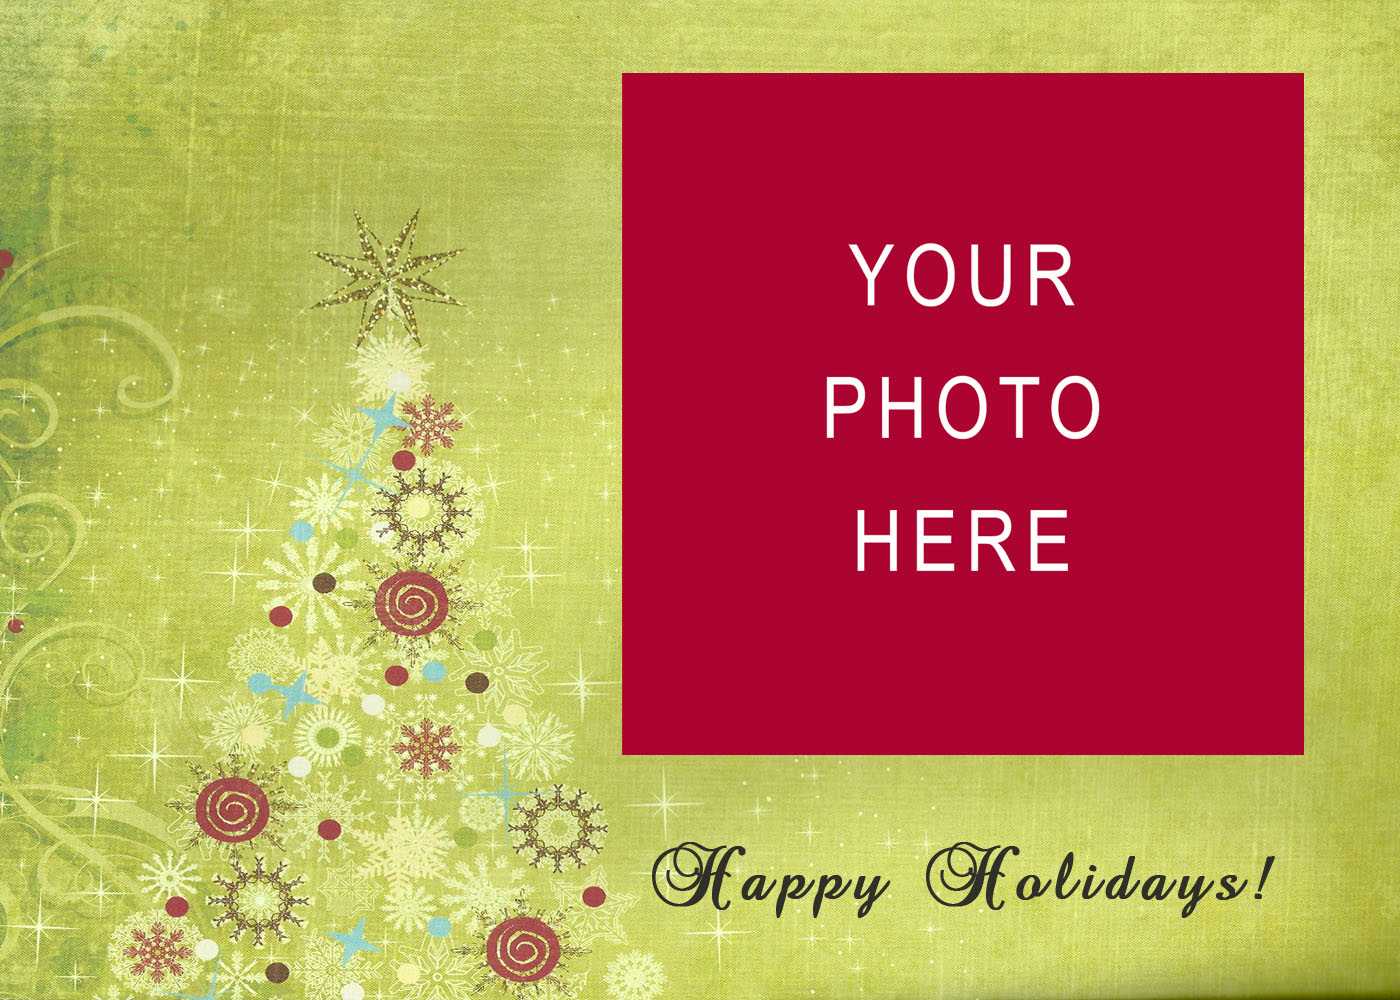 11 Christmas Card Templates Free Download Images - Christmas With Regard To Christmas Photo Cards Templates Free Downloads